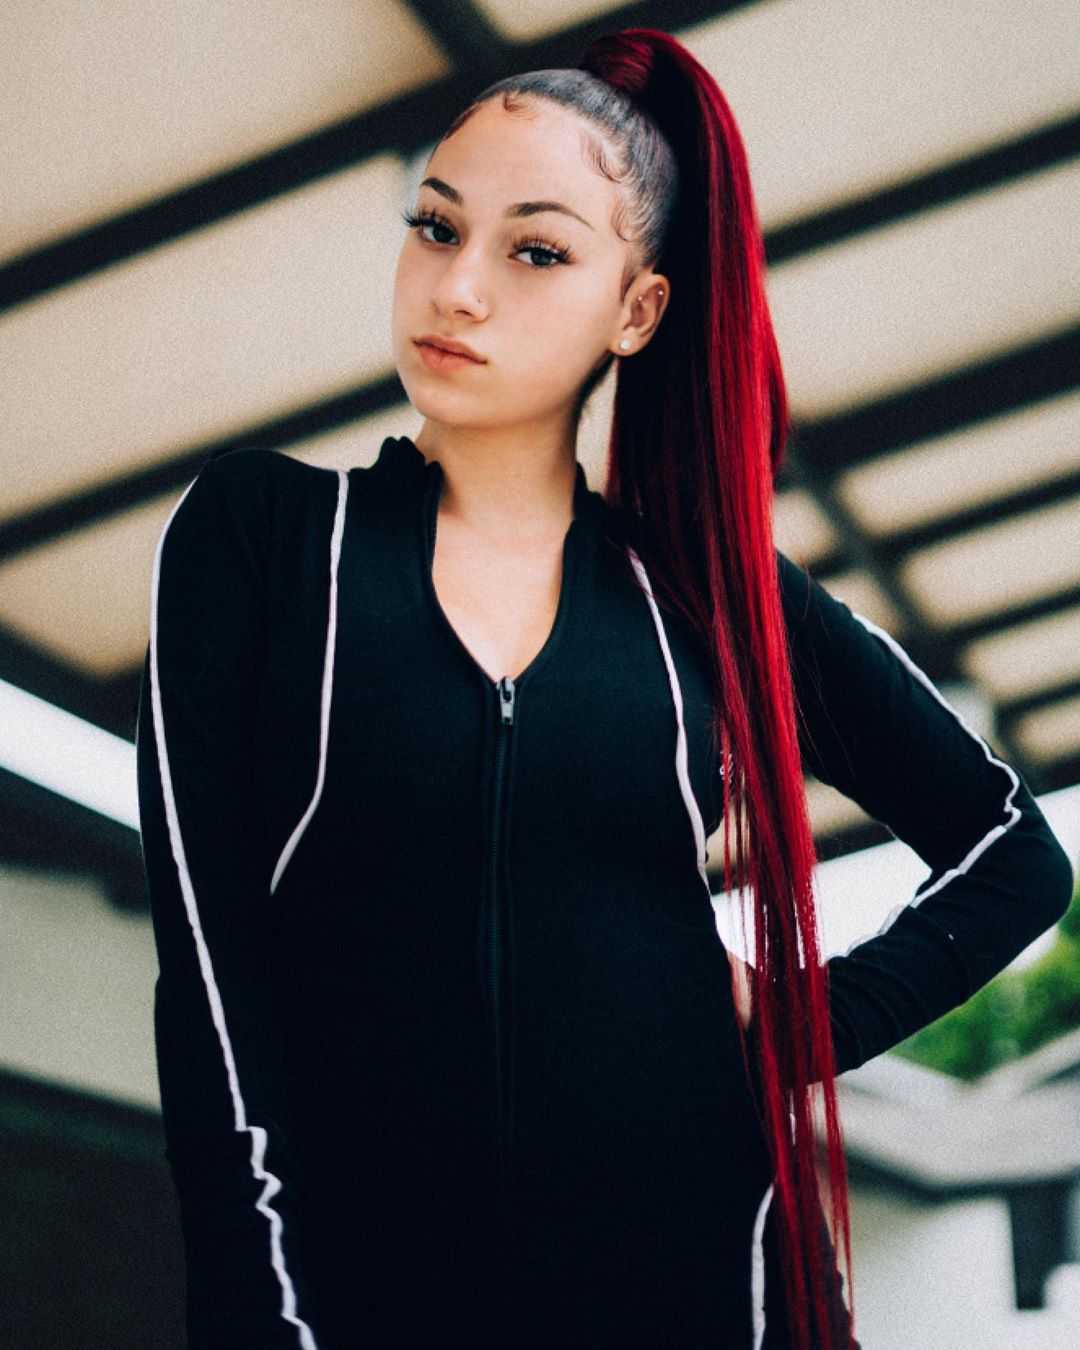 70+ Hot Pictures Of Danielle Bregoli aka Bhad Bhabie Which Will Win Your Heart 4